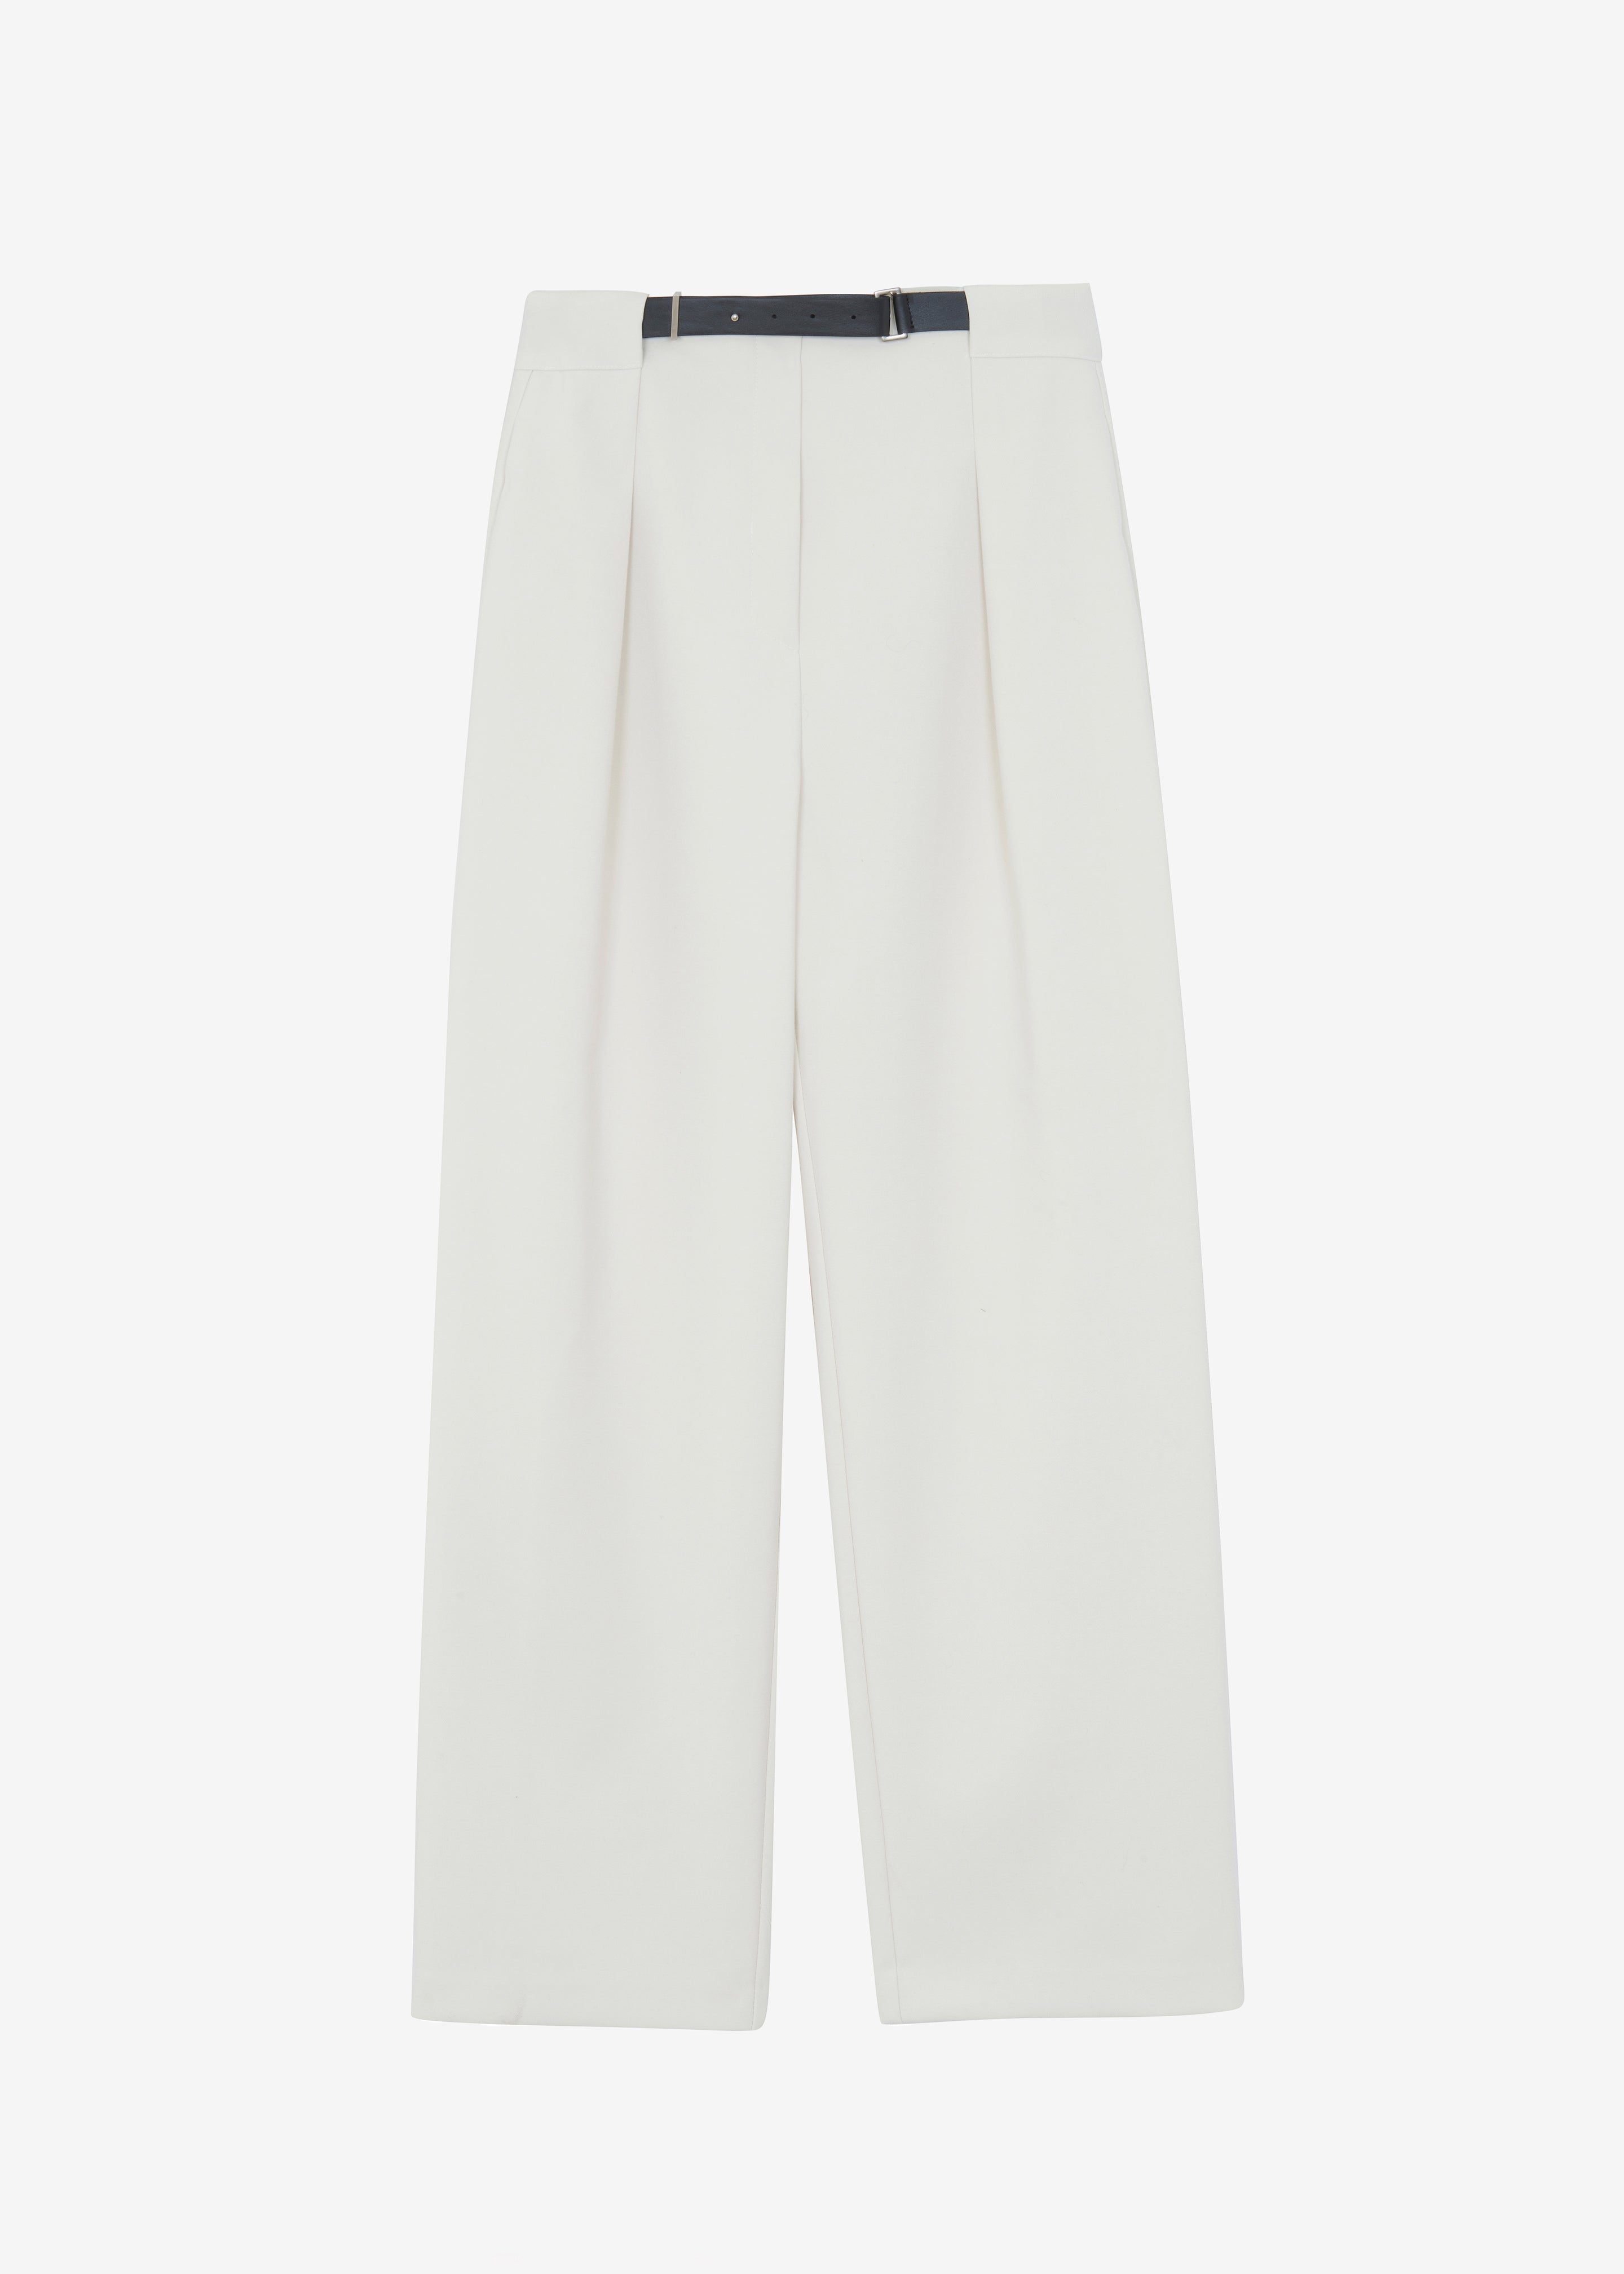 Corinne Belted Pants - Cream - 12